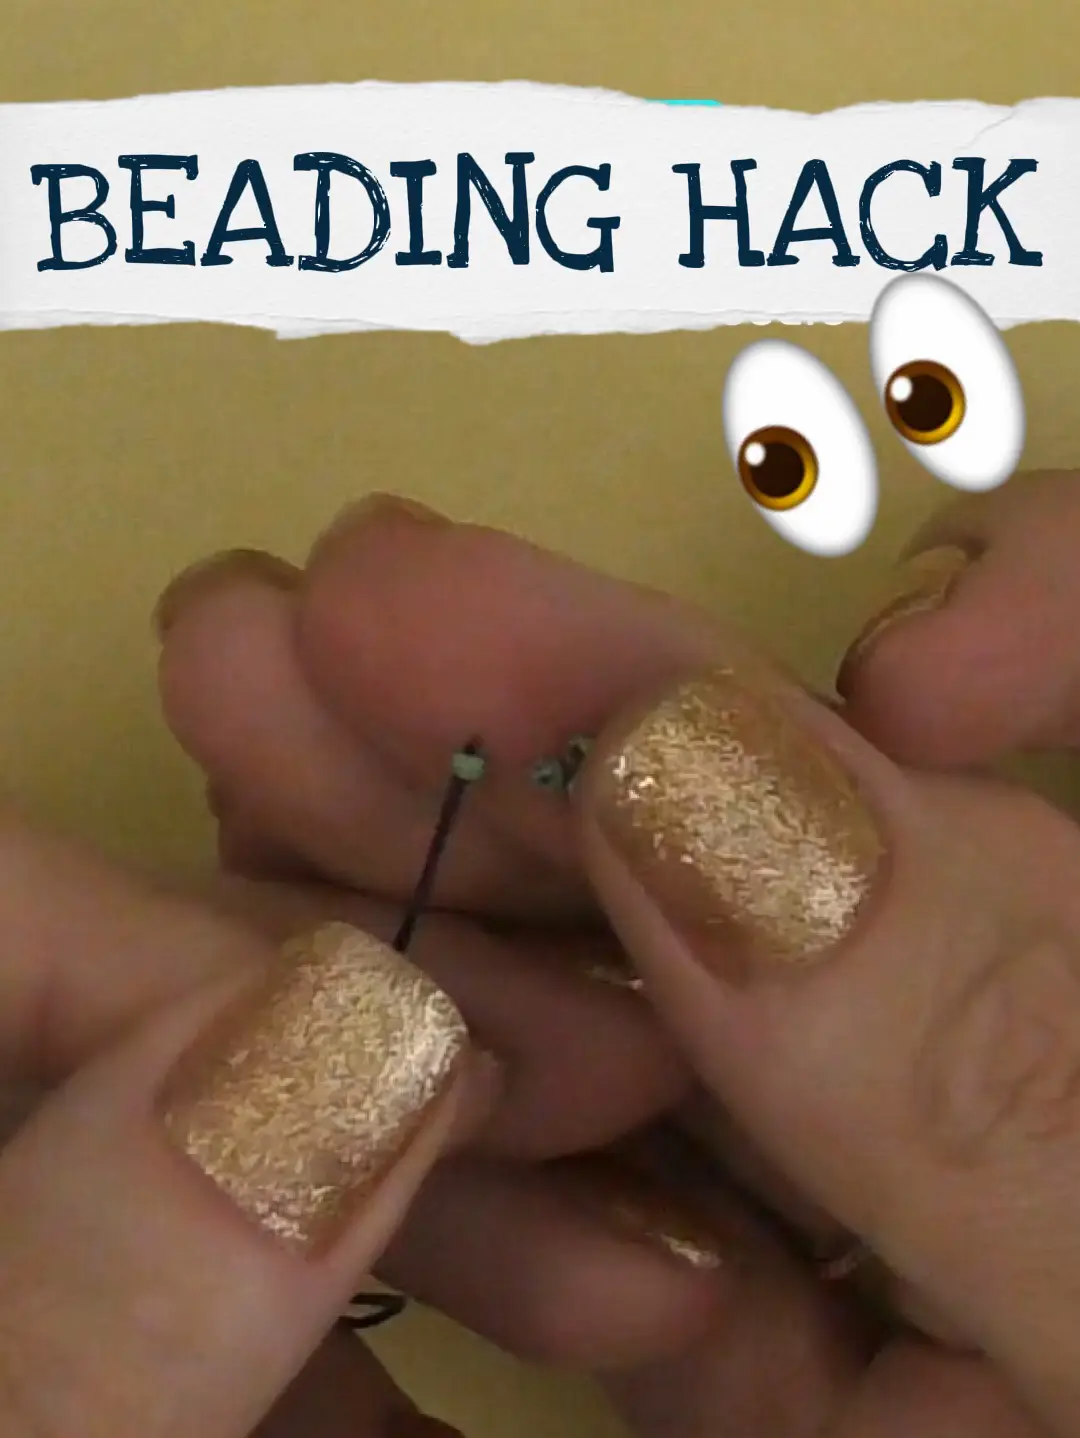 Threading Tiny Beads without a Needle - Cord Stringing Hack